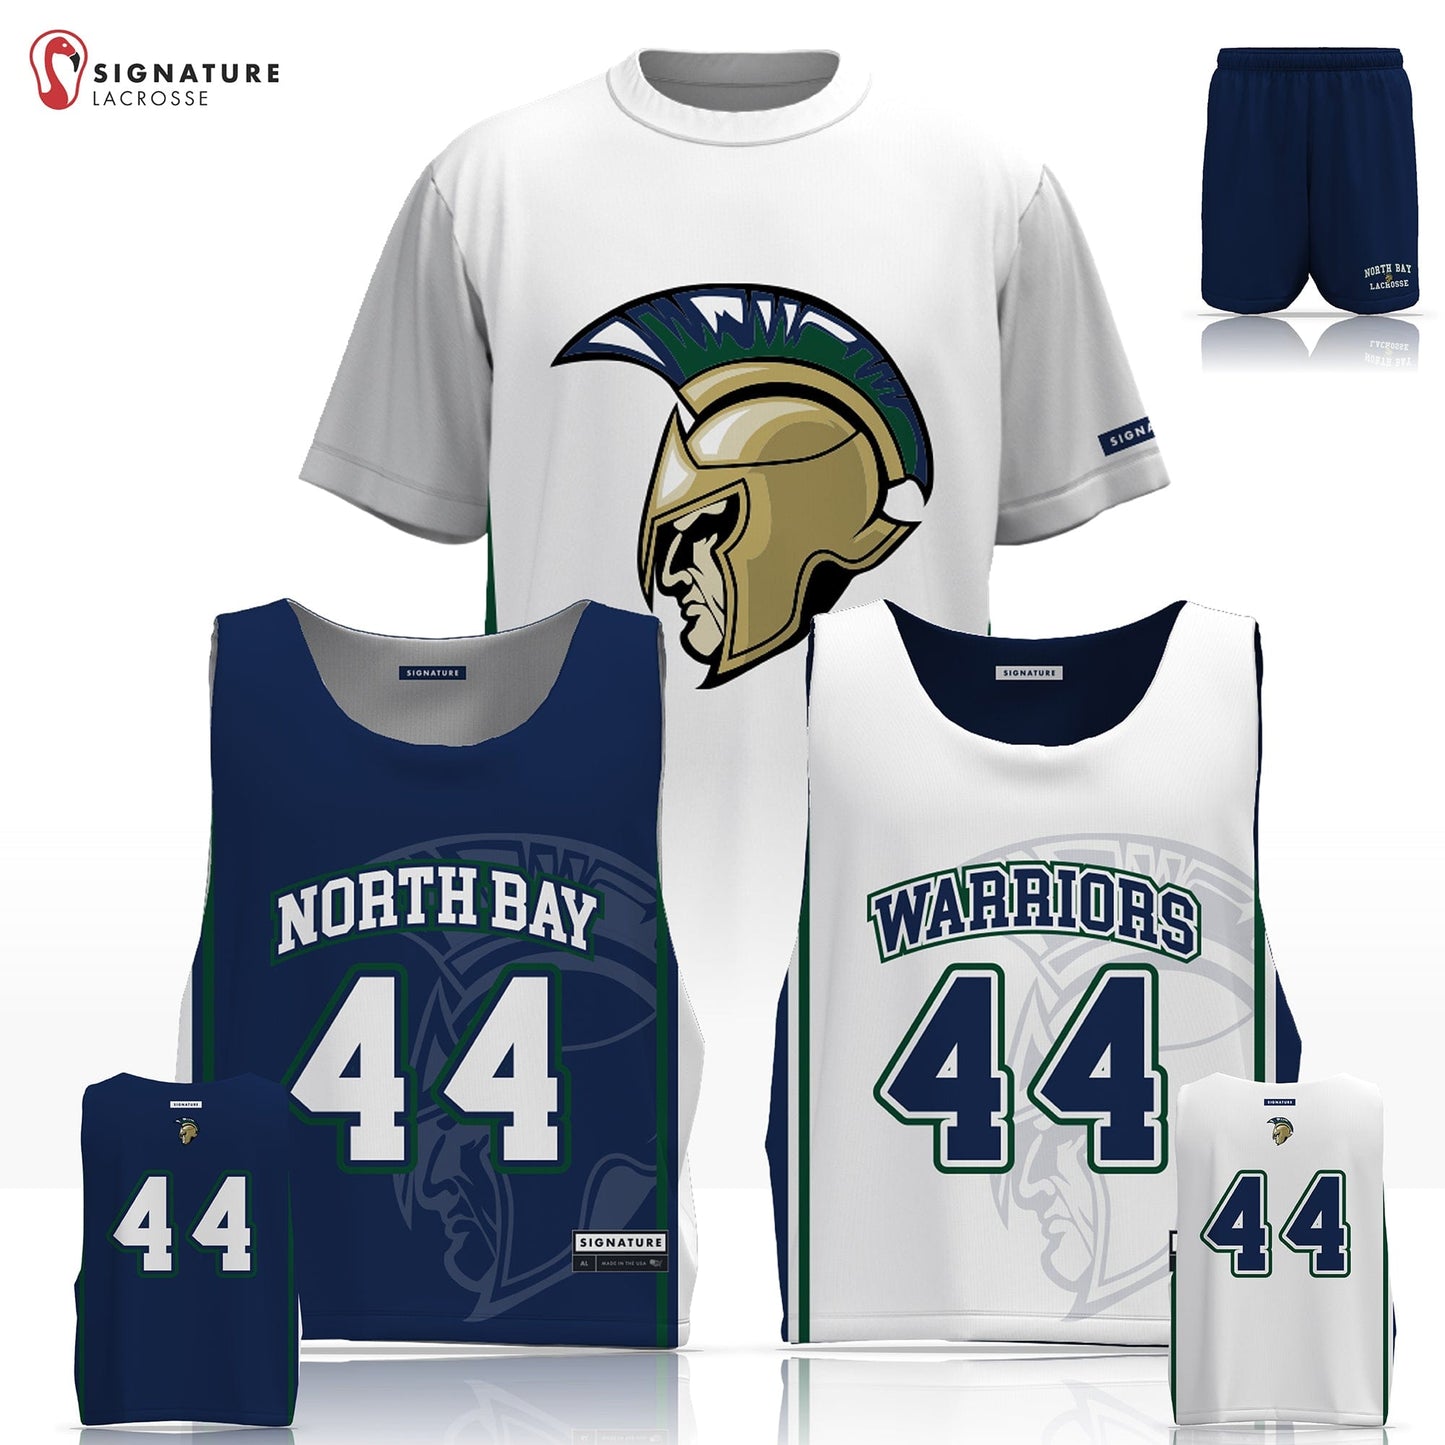 North Bay Warriors Lacrosse Men's 3 Piece Player Game Package: Highschool Signature Lacrosse